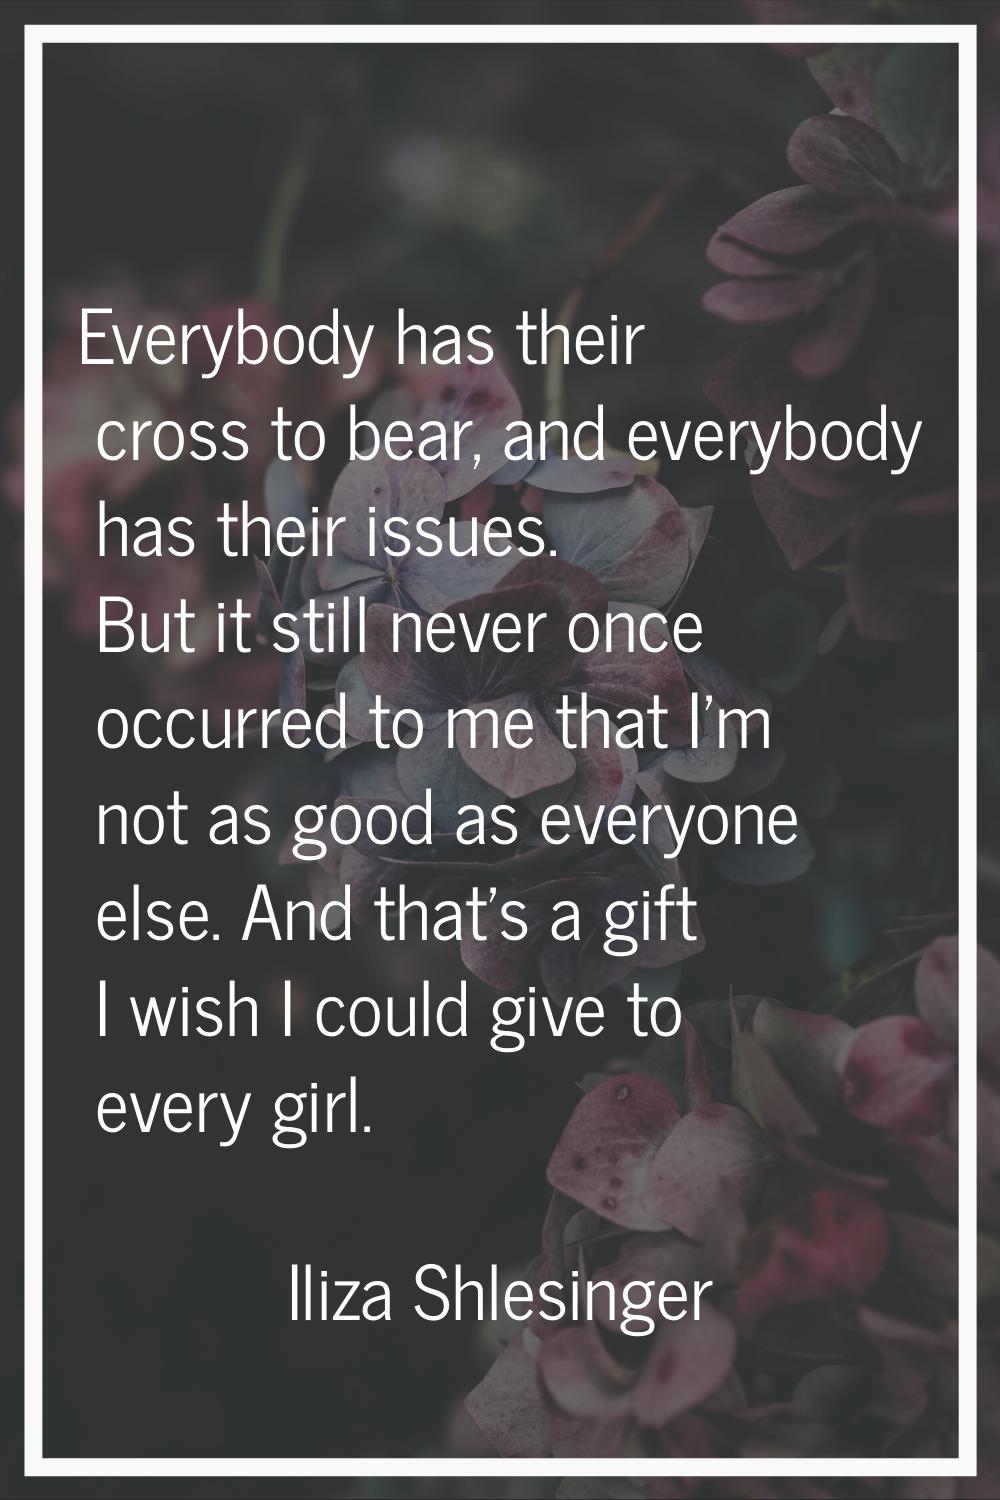 Everybody has their cross to bear, and everybody has their issues. But it still never once occurred